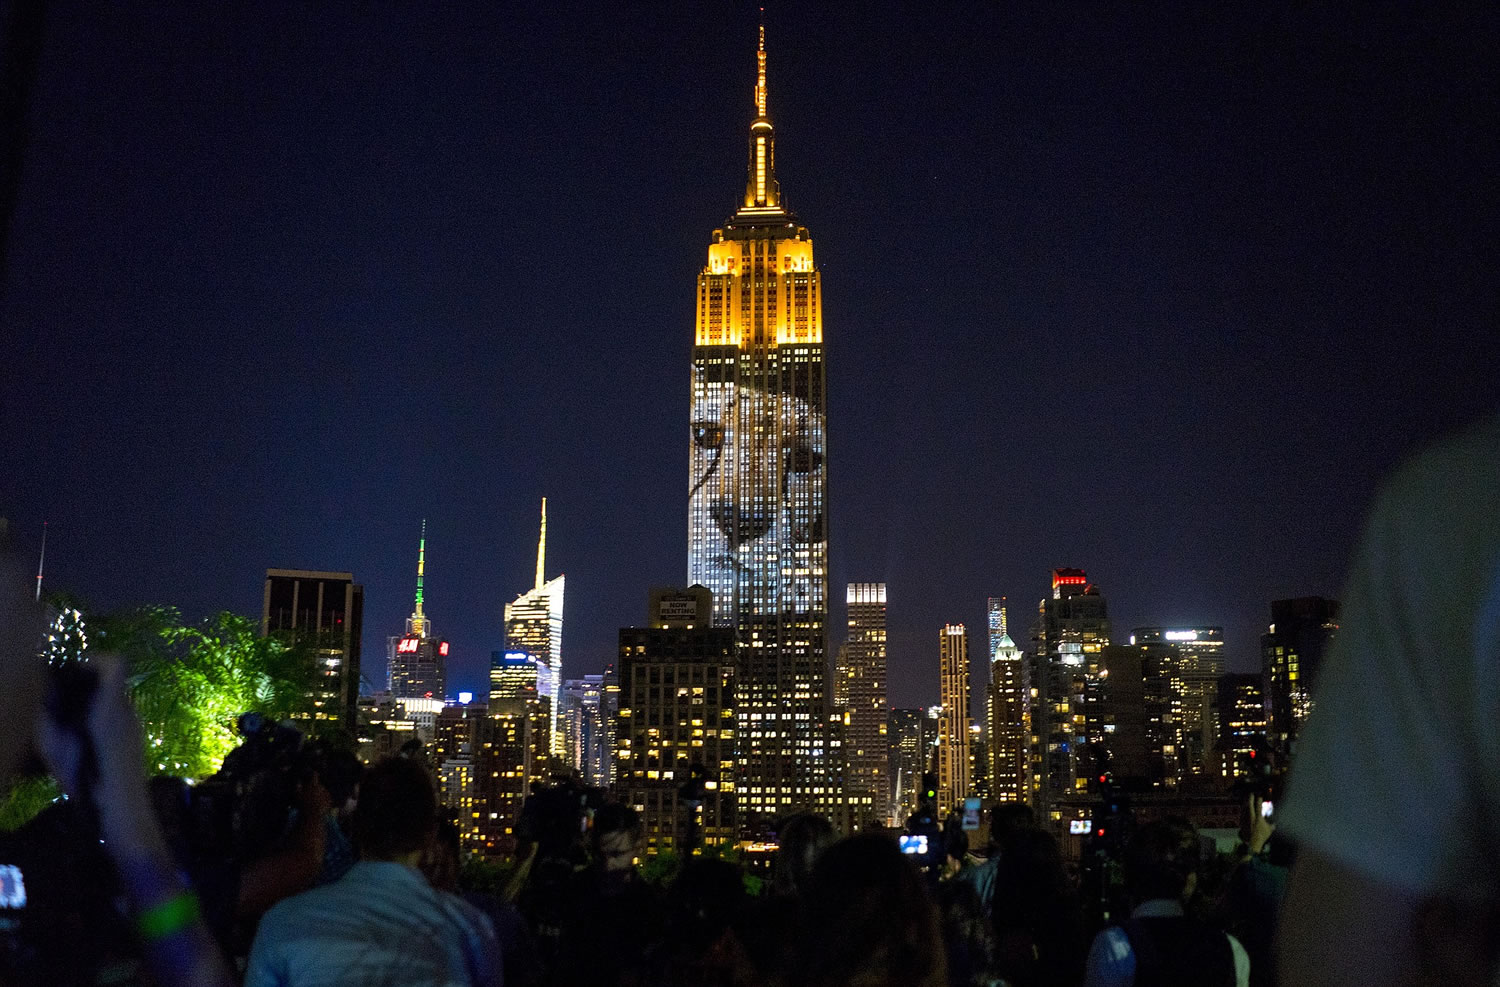 Large images of endangered species are projected on the south facade of The Empire State Building, Saturday, Aug. 1, 2015, in New York.